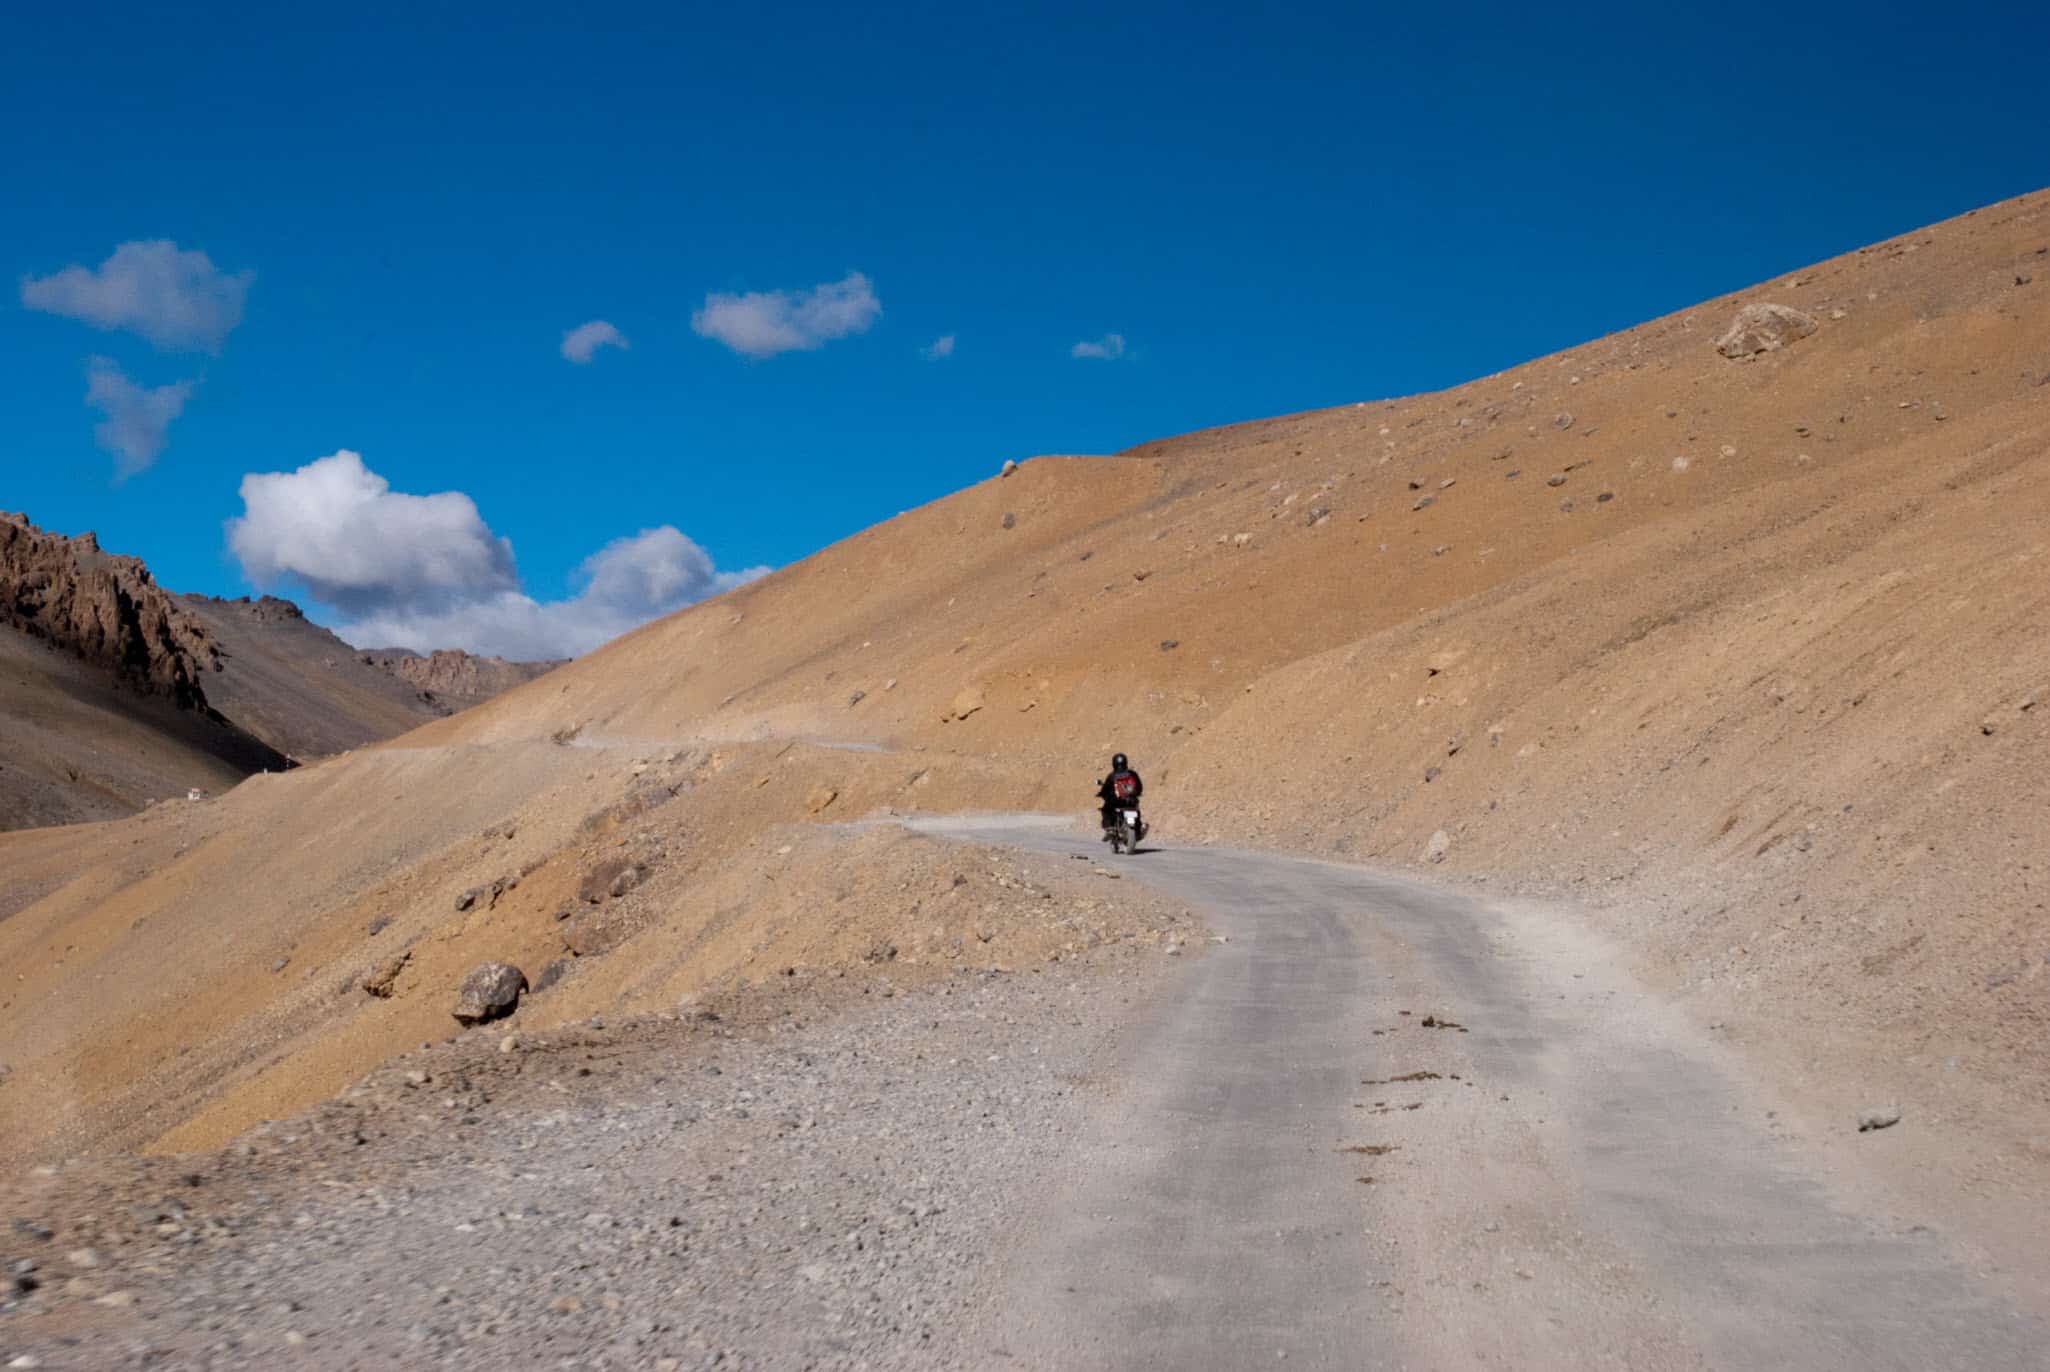 When you ride alone on Manali Leh Highway